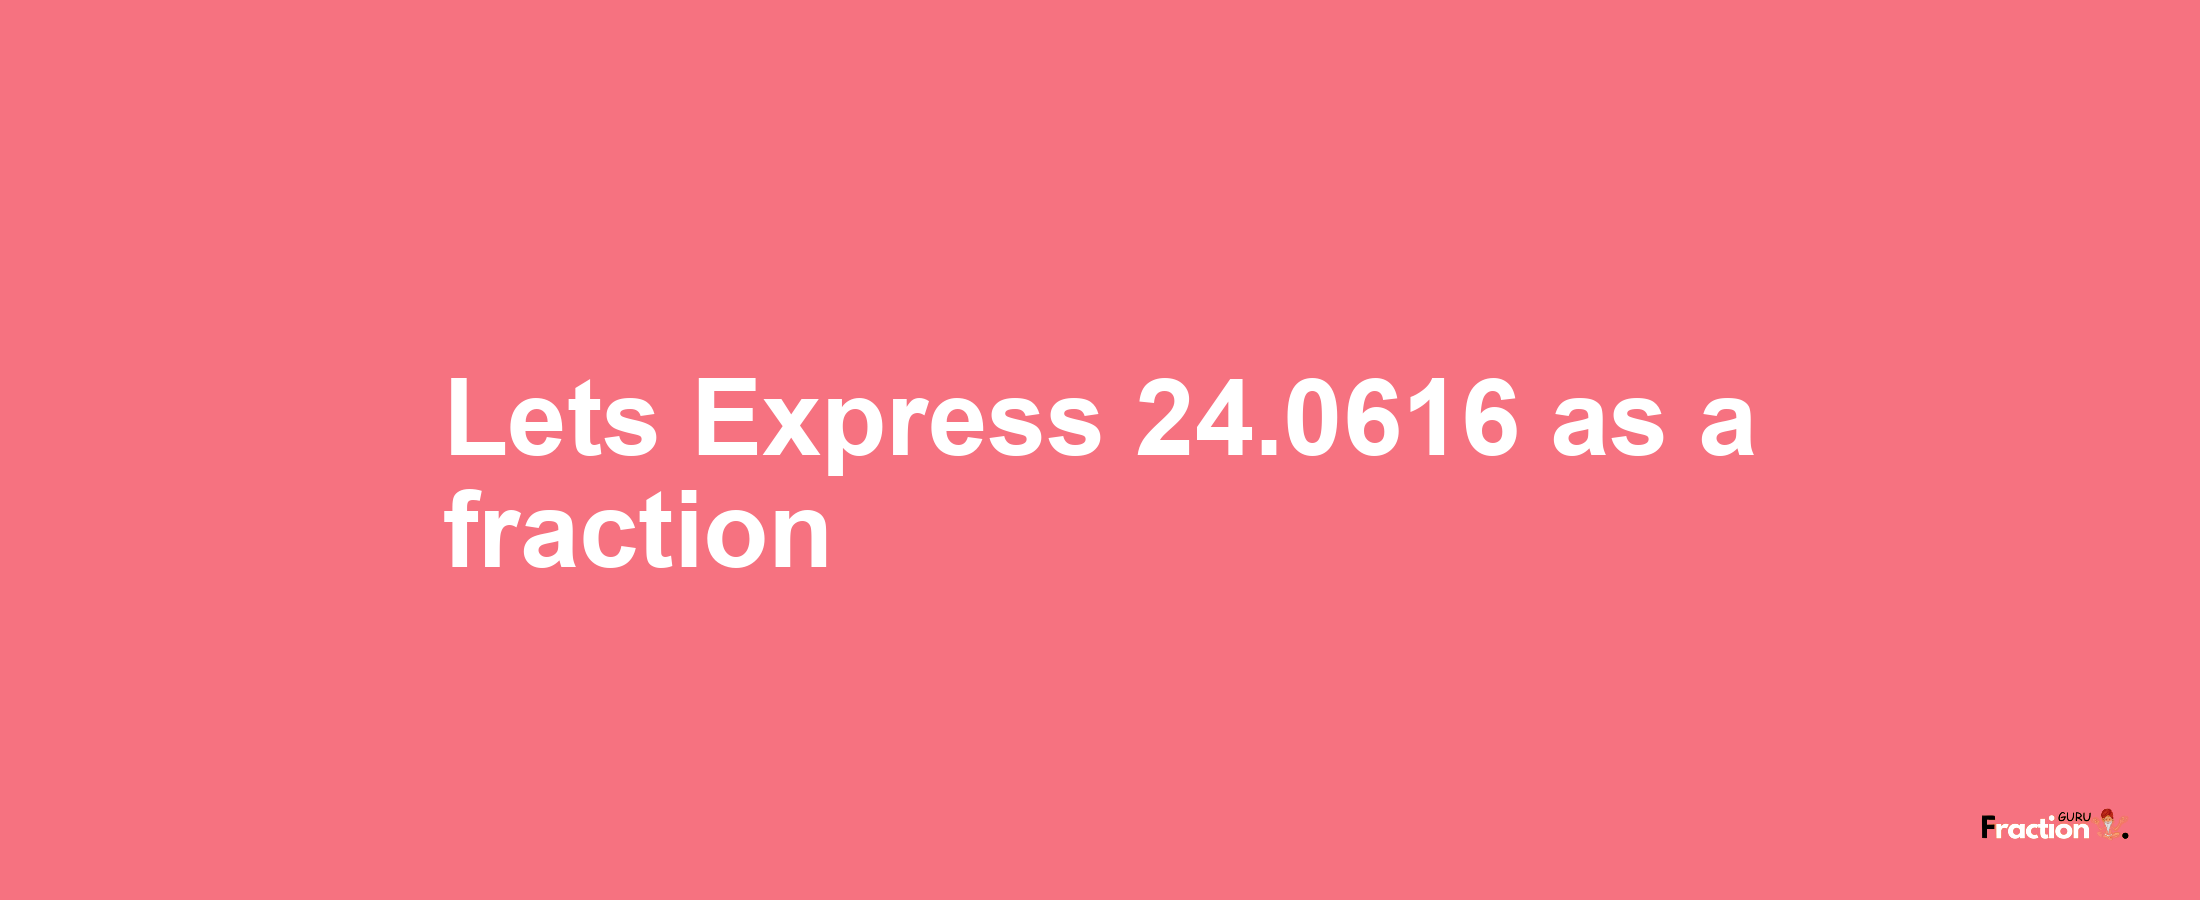 Lets Express 24.0616 as afraction